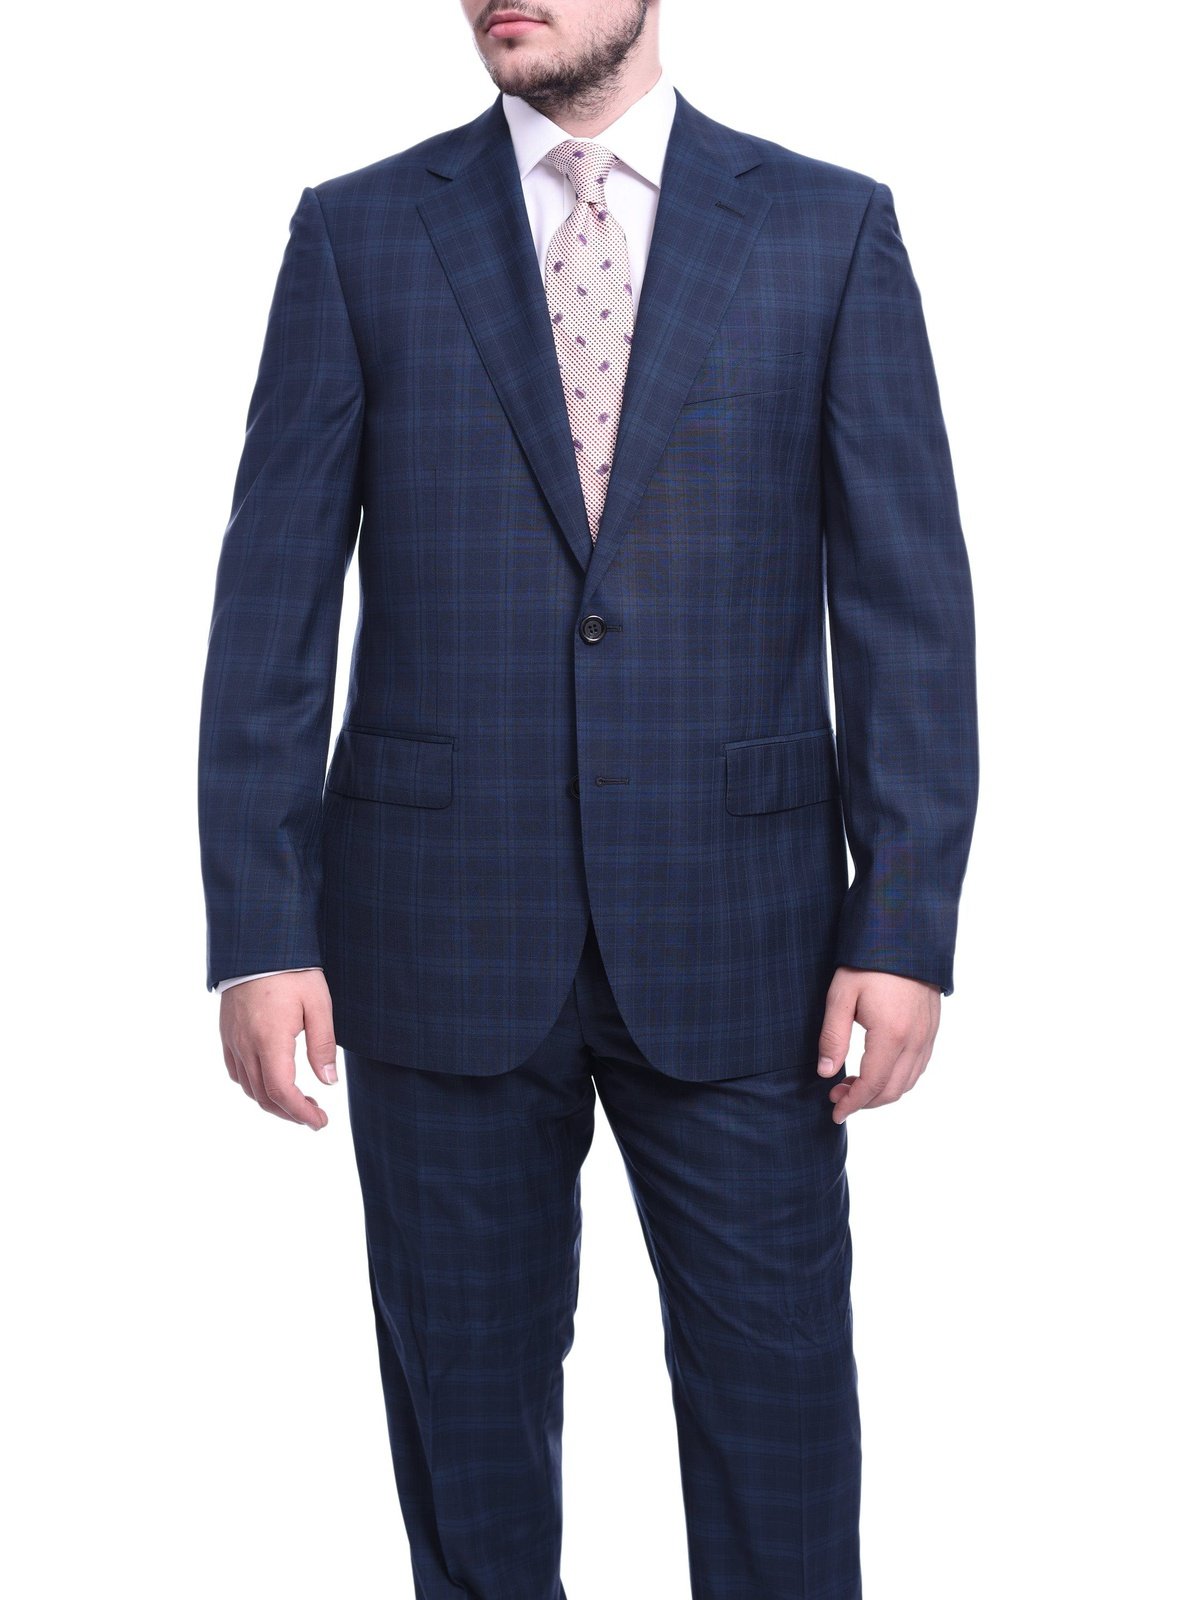 Napoli TWO PIECE SUITS Napoli Classic Fit Navy Blue Plaid Half Canvassed Super 120s Guabello Wool Suit